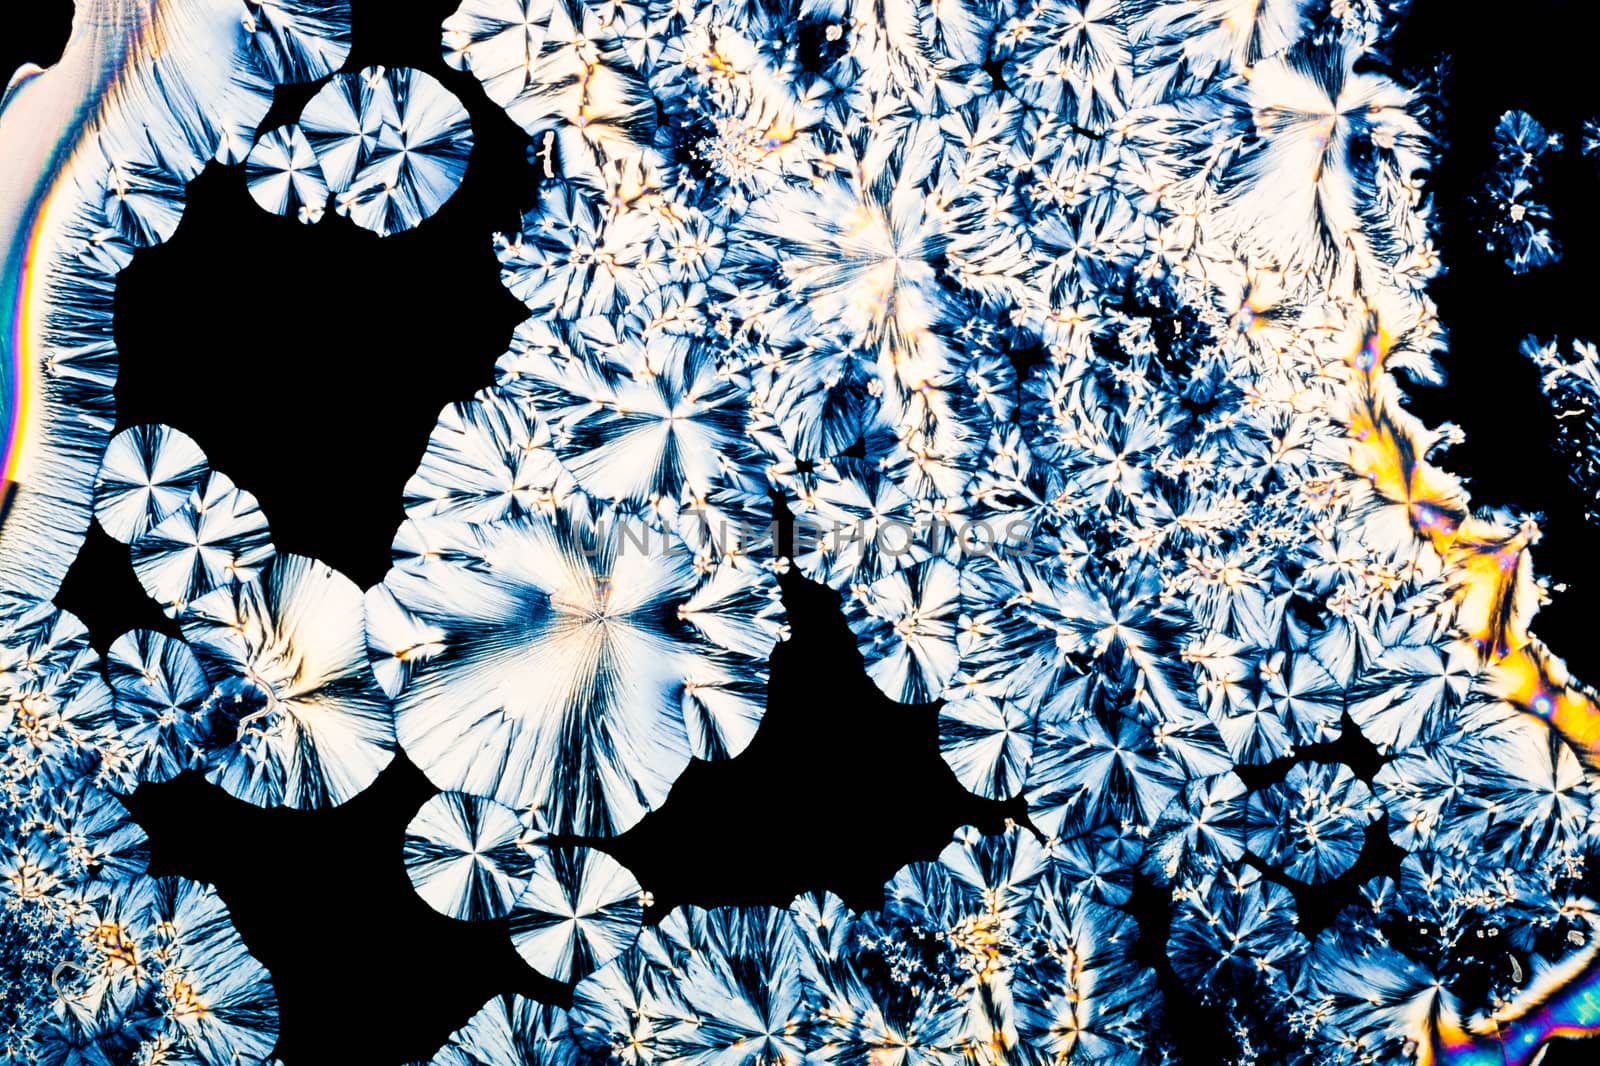 Ascorbic acid crystals in polarized light by PiLens